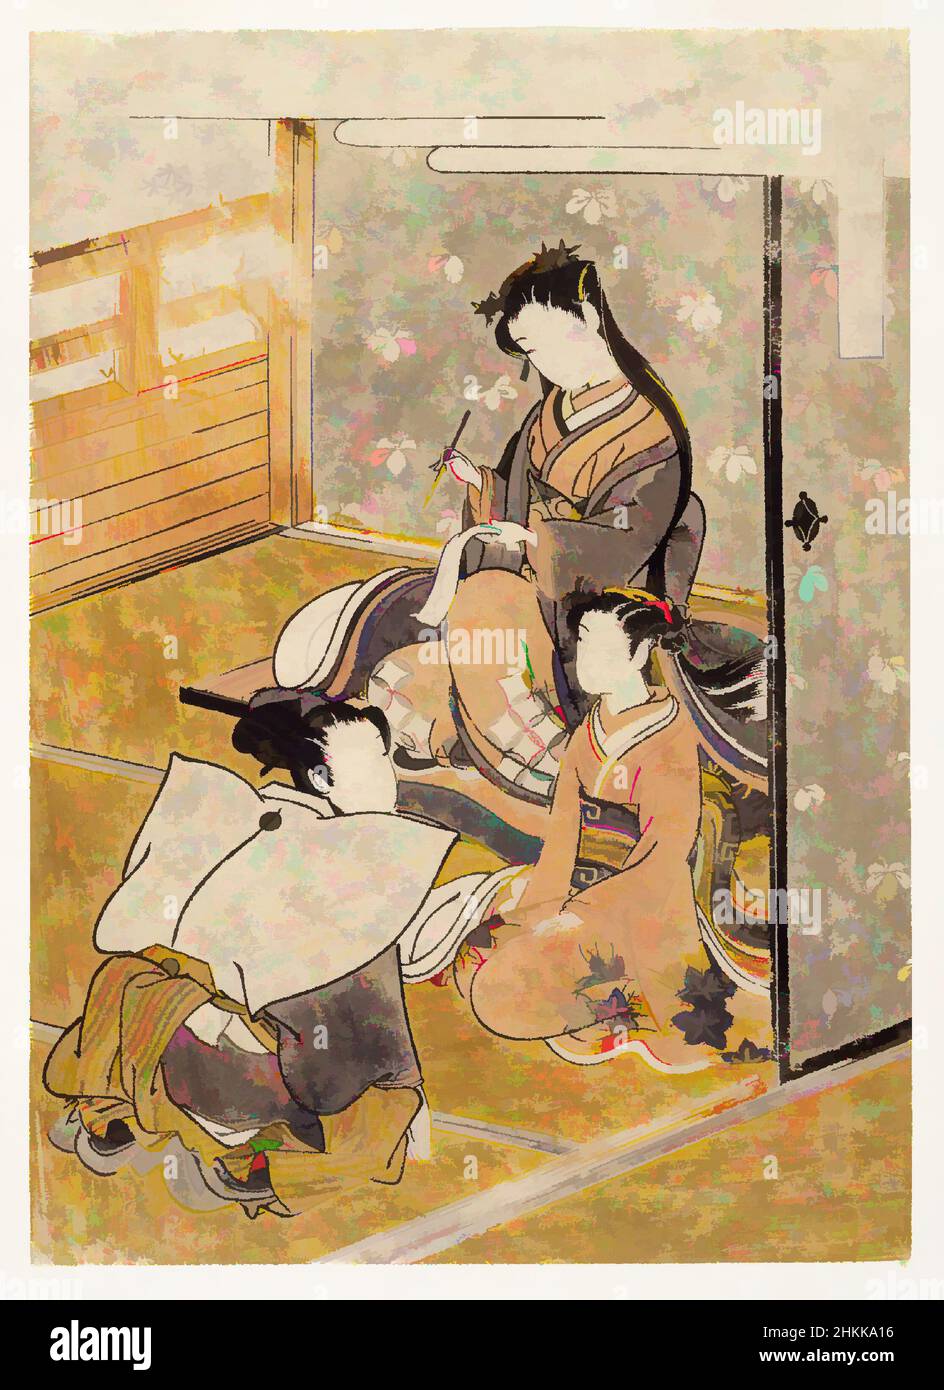 Art inspired by Young Woman with Youth and Young Attendant: Taifu, from Furyu Jinrin Juniso, From the series: Furyu Jinrin Ju-niso, Isoda Koryusai, Japanese, ca. 1766-1788, Color woodblock print on paper, Japan, late 18th century, Edo Period, 8 5/8 x 6 3/16 in., 21.9 x 15.7 cm, Classic works modernized by Artotop with a splash of modernity. Shapes, color and value, eye-catching visual impact on art. Emotions through freedom of artworks in a contemporary way. A timeless message pursuing a wildly creative new direction. Artists turning to the digital medium and creating the Artotop NFT Stock Photo